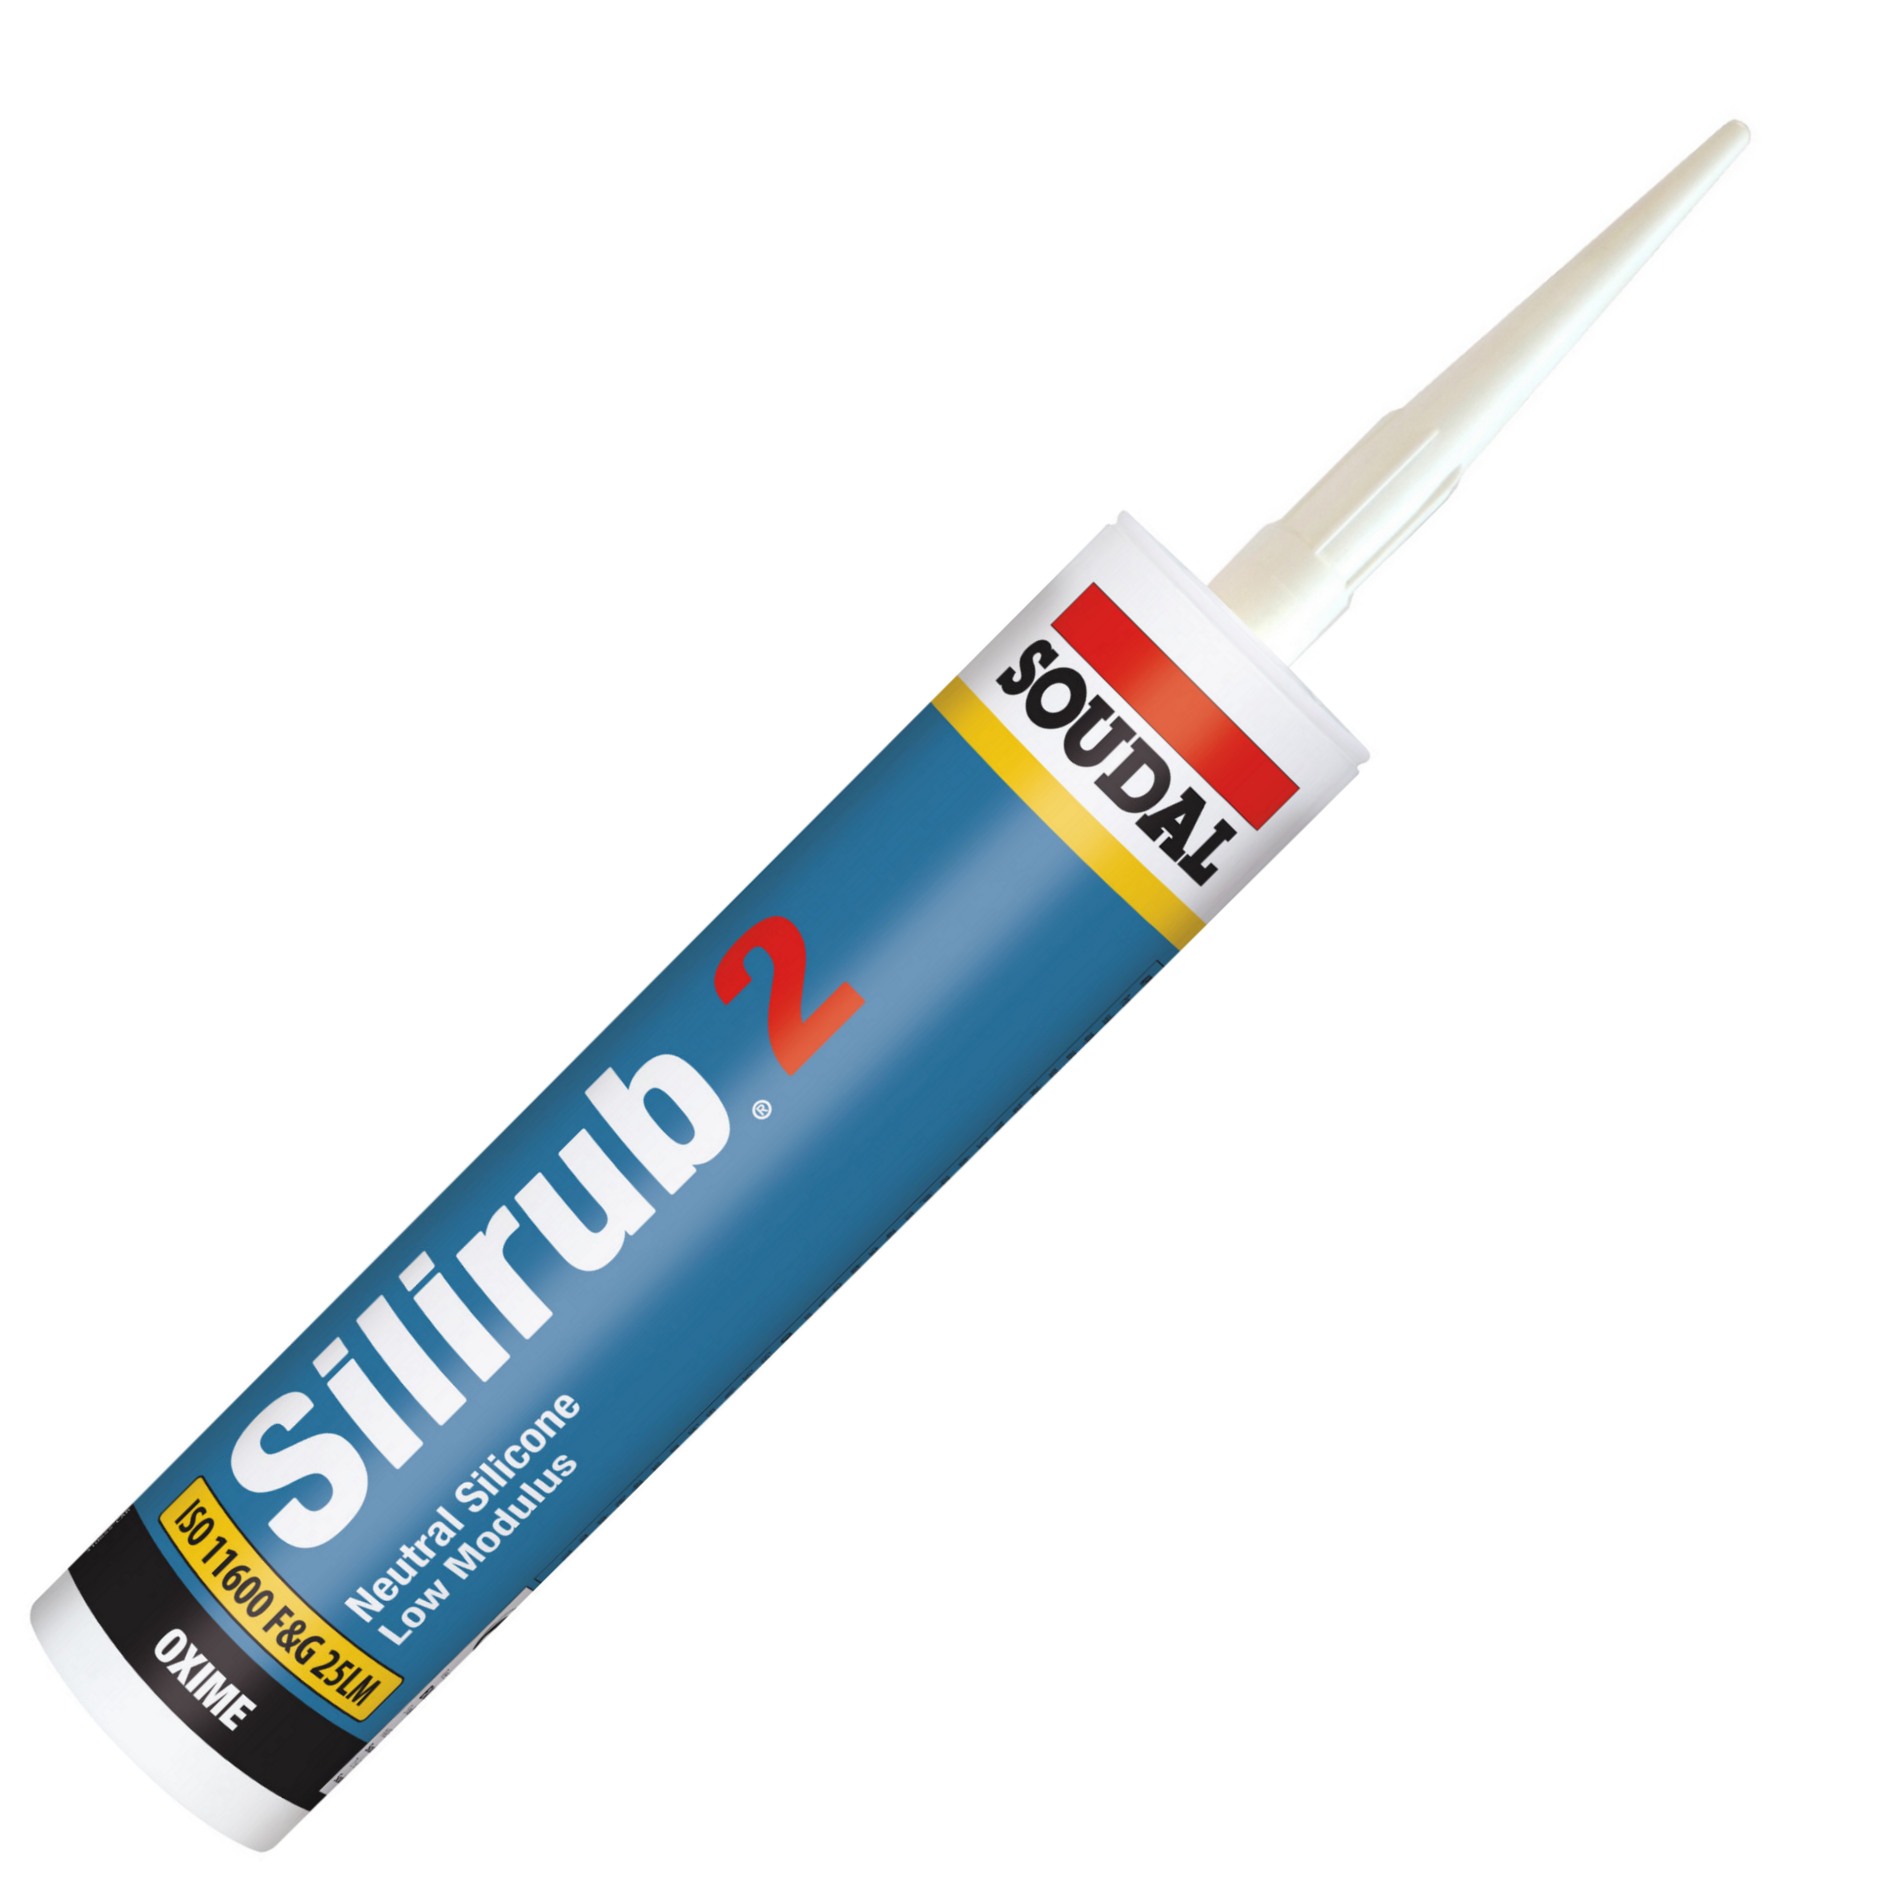 Silicones including a wide range from Soudal - DGS Group Plc.